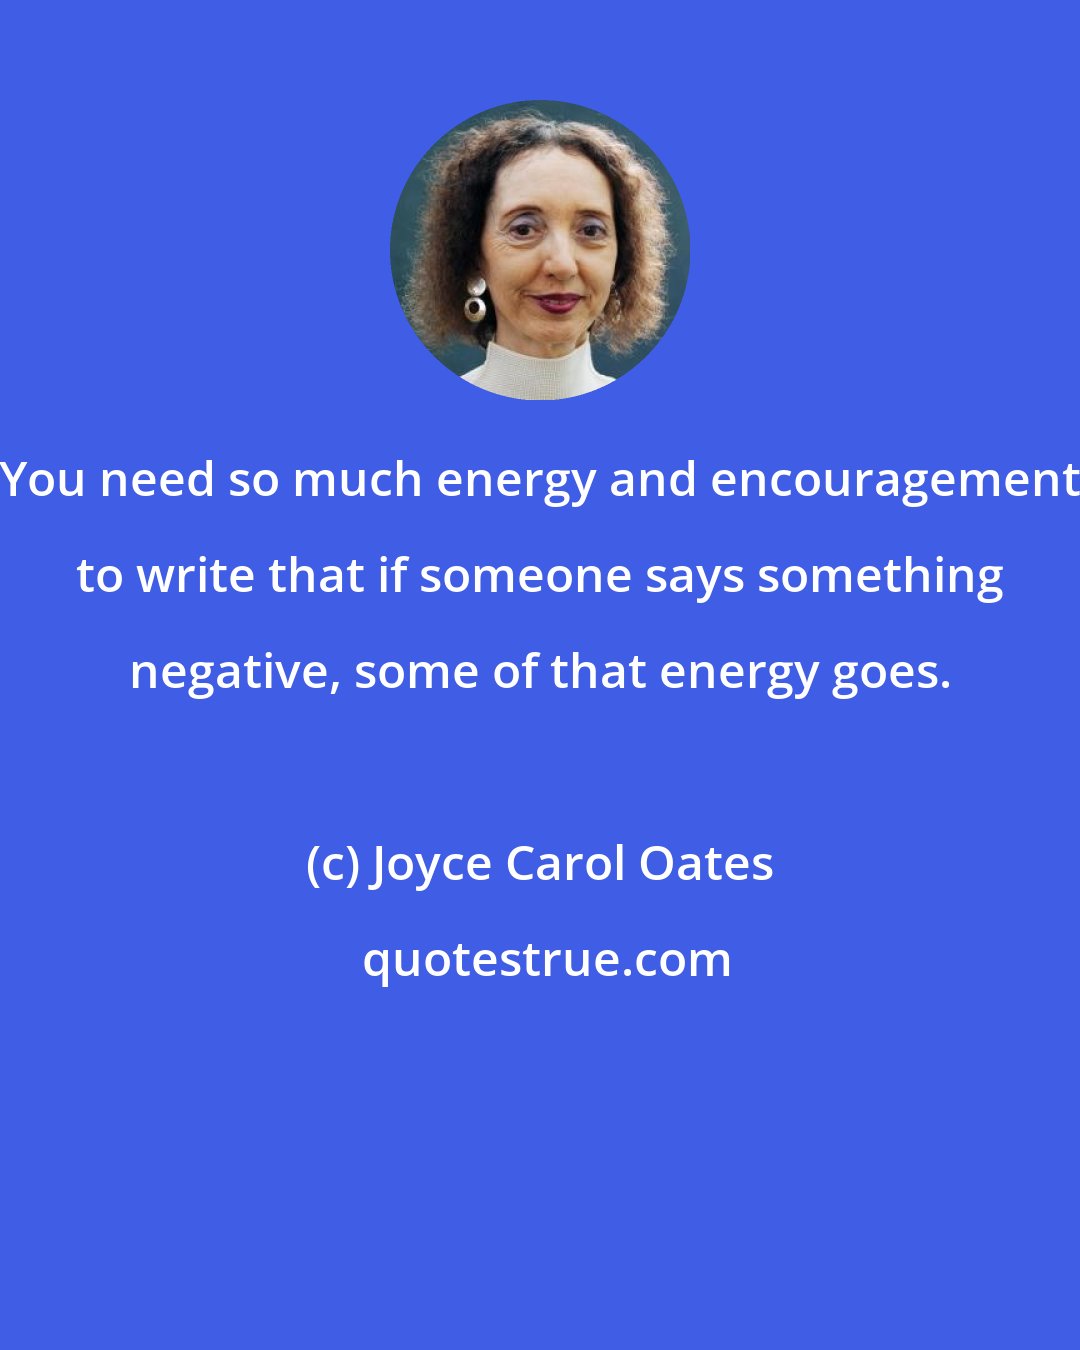 Joyce Carol Oates: You need so much energy and encouragement to write that if someone says something negative, some of that energy goes.